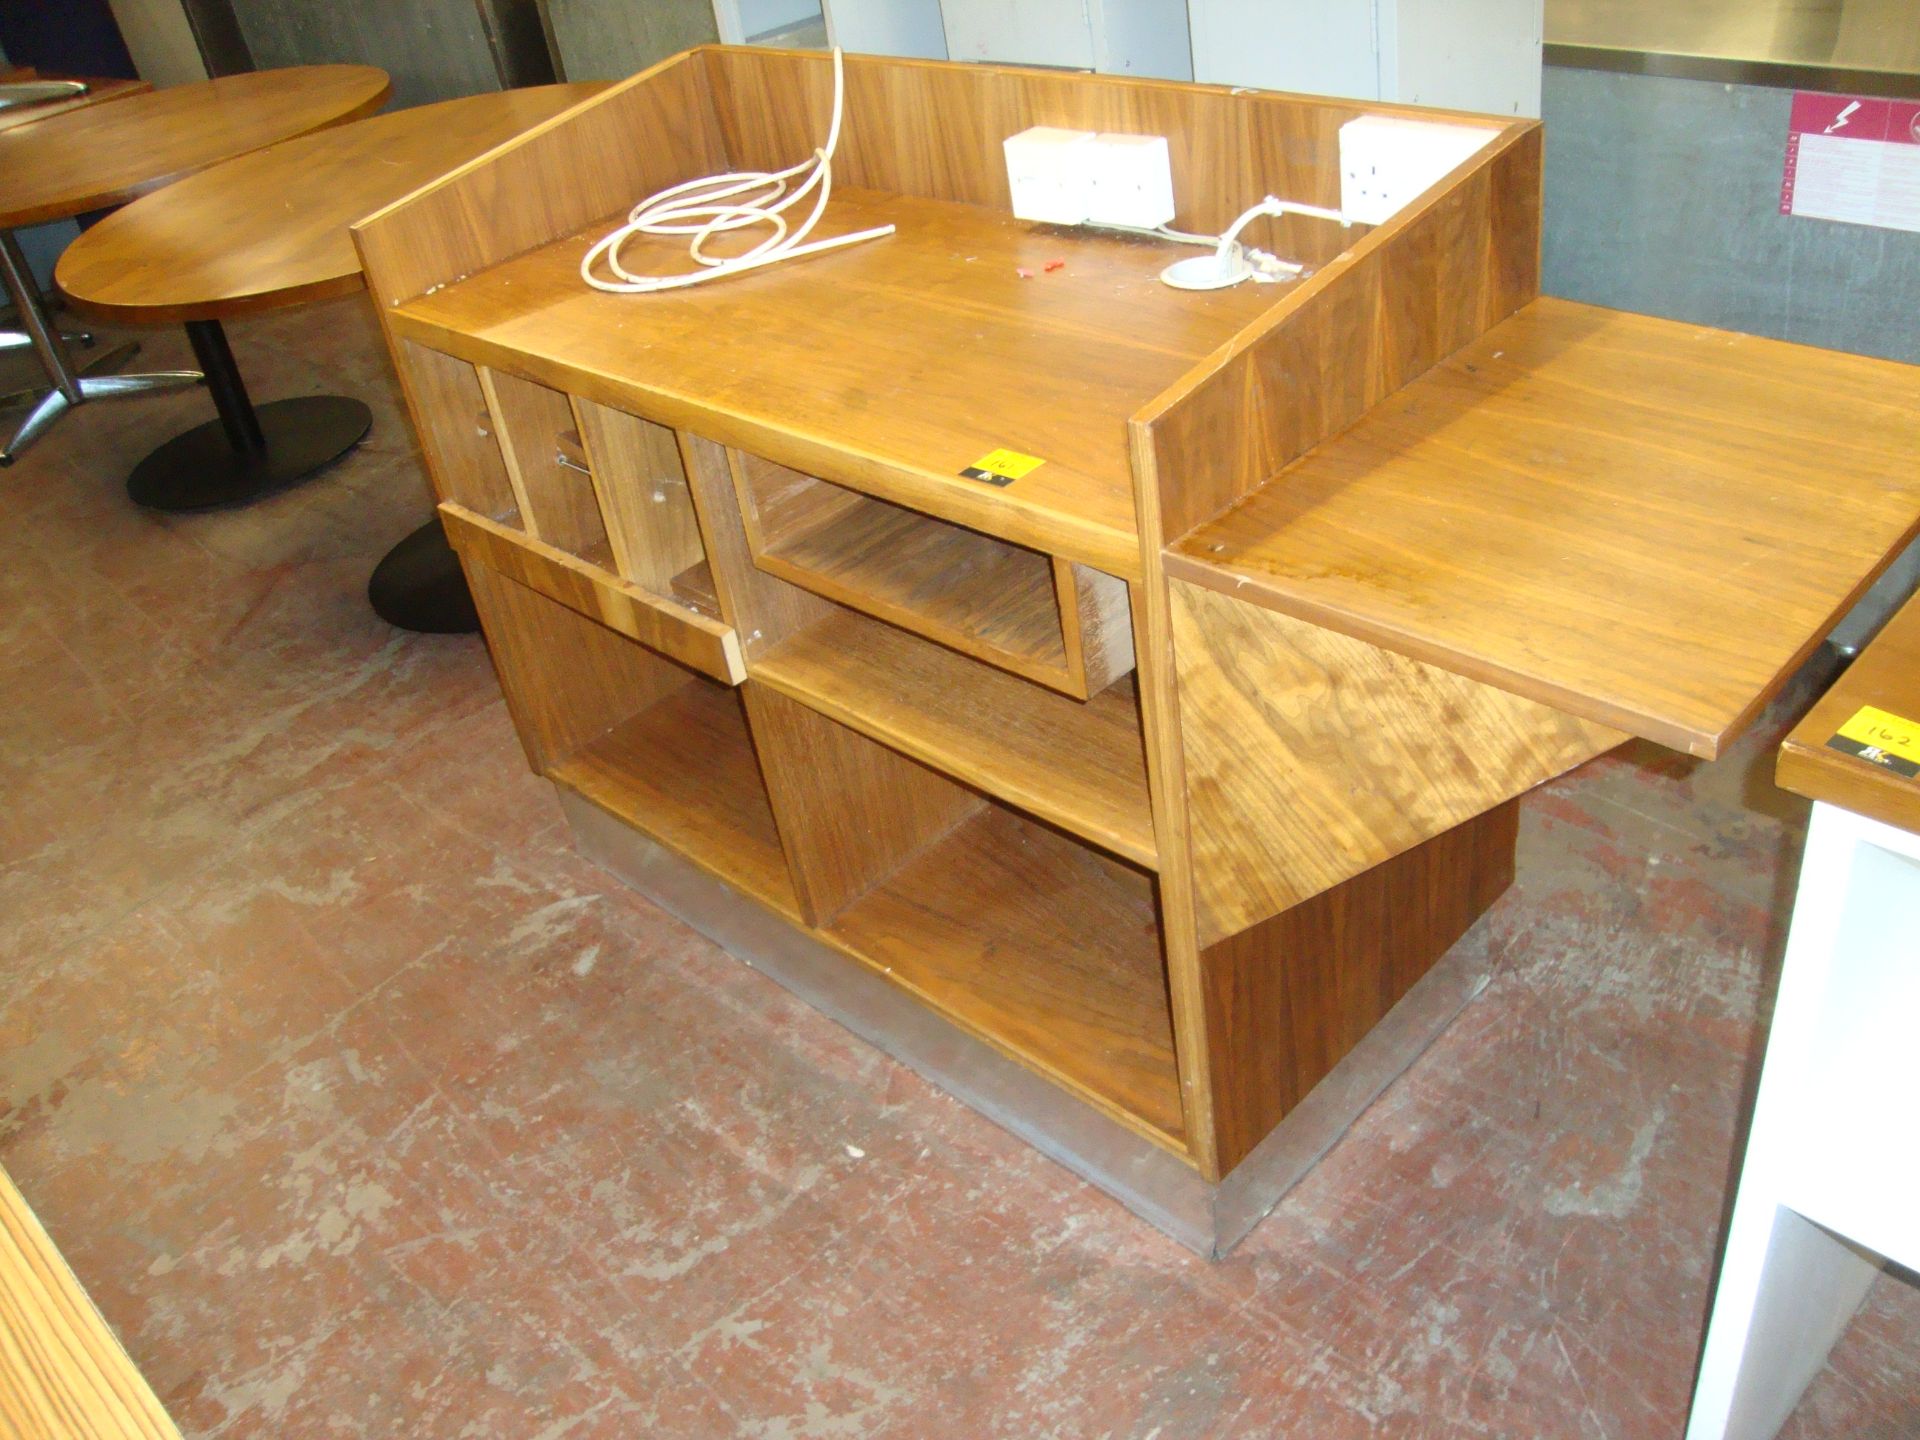 Wooden serving/buffet unit with built-in electrics & phone sockets, incorporating extending shelf, - Image 2 of 3